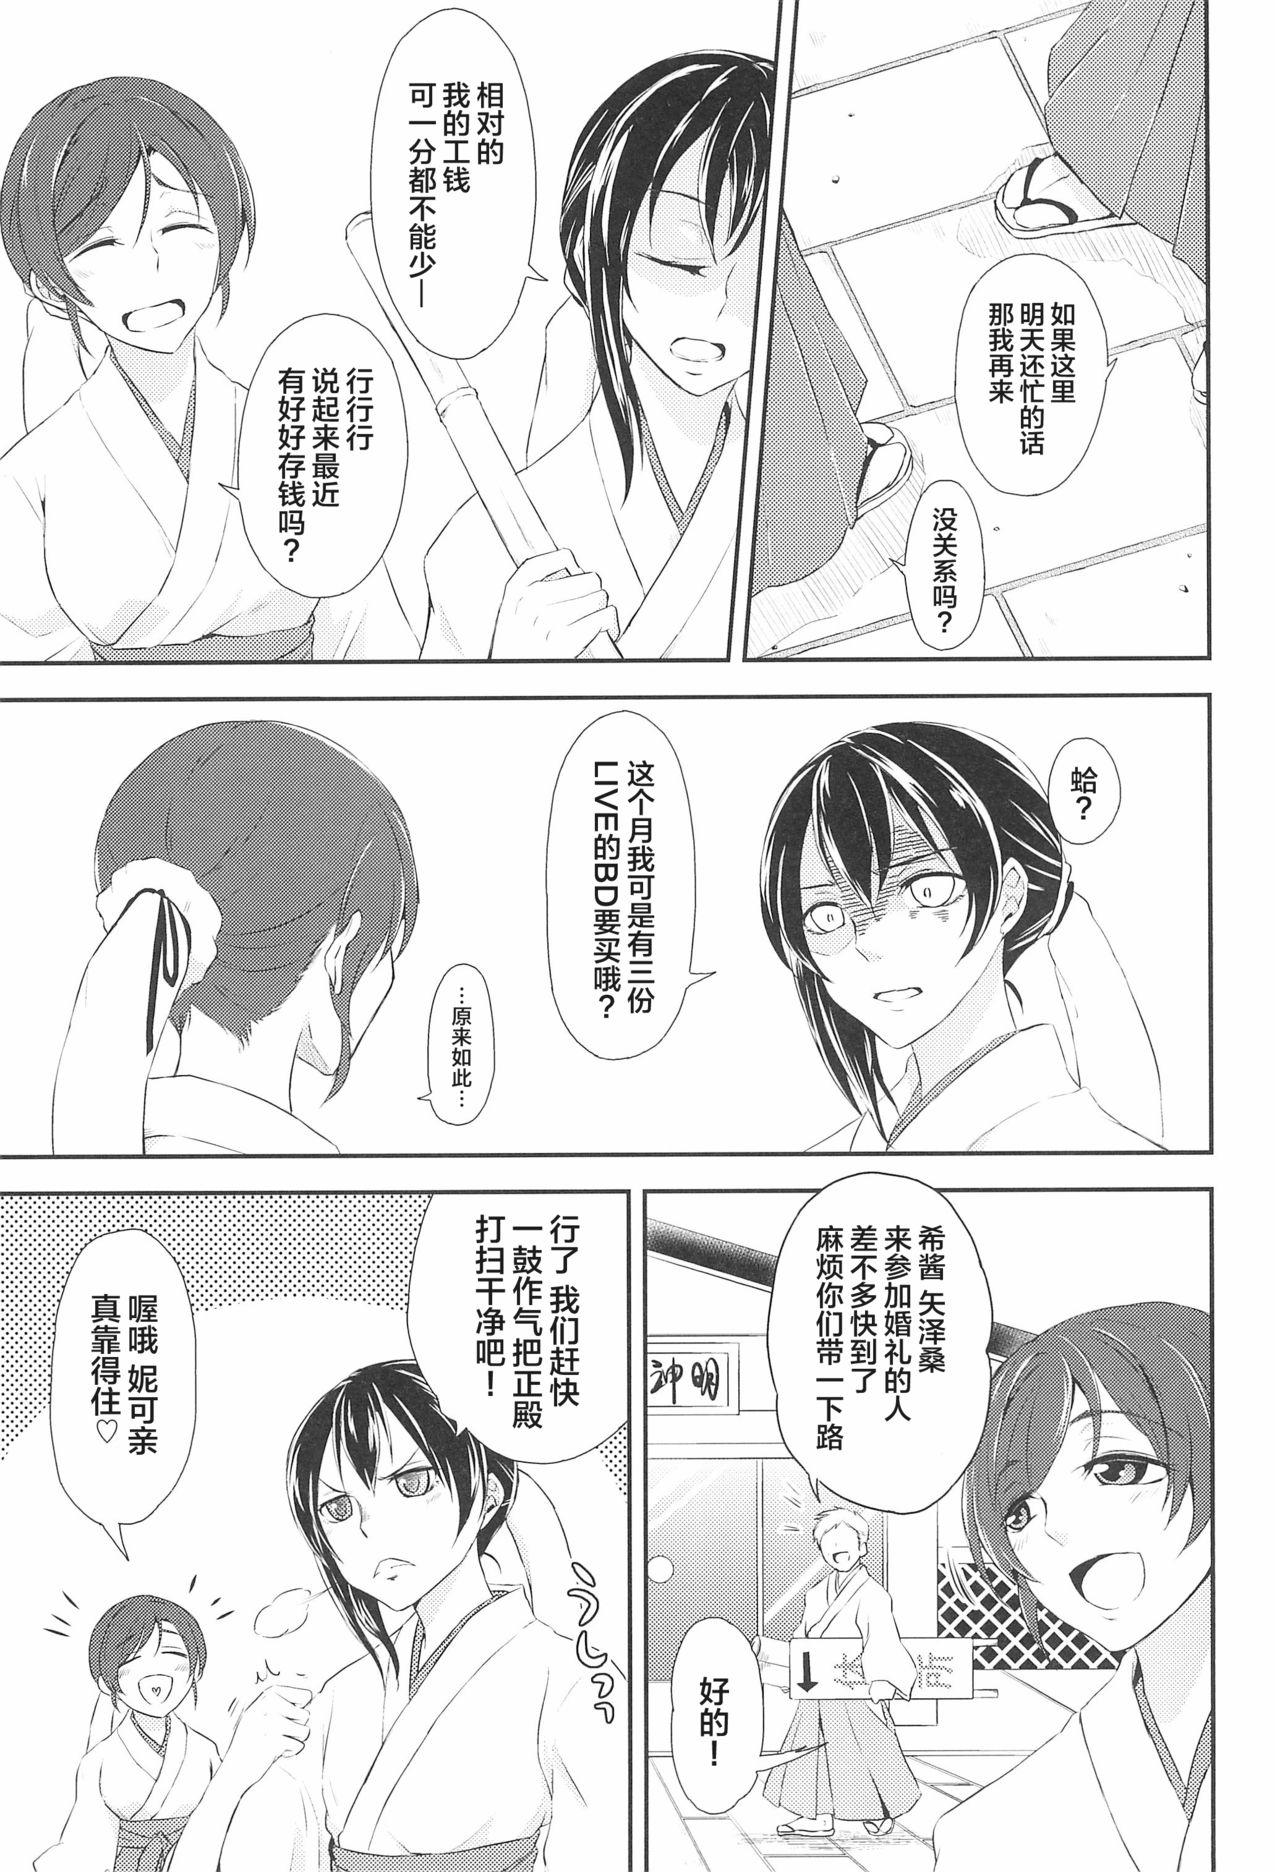 Topless Mirai de Kiss o - Kiss in the Future - Love live Ginger - Page 8